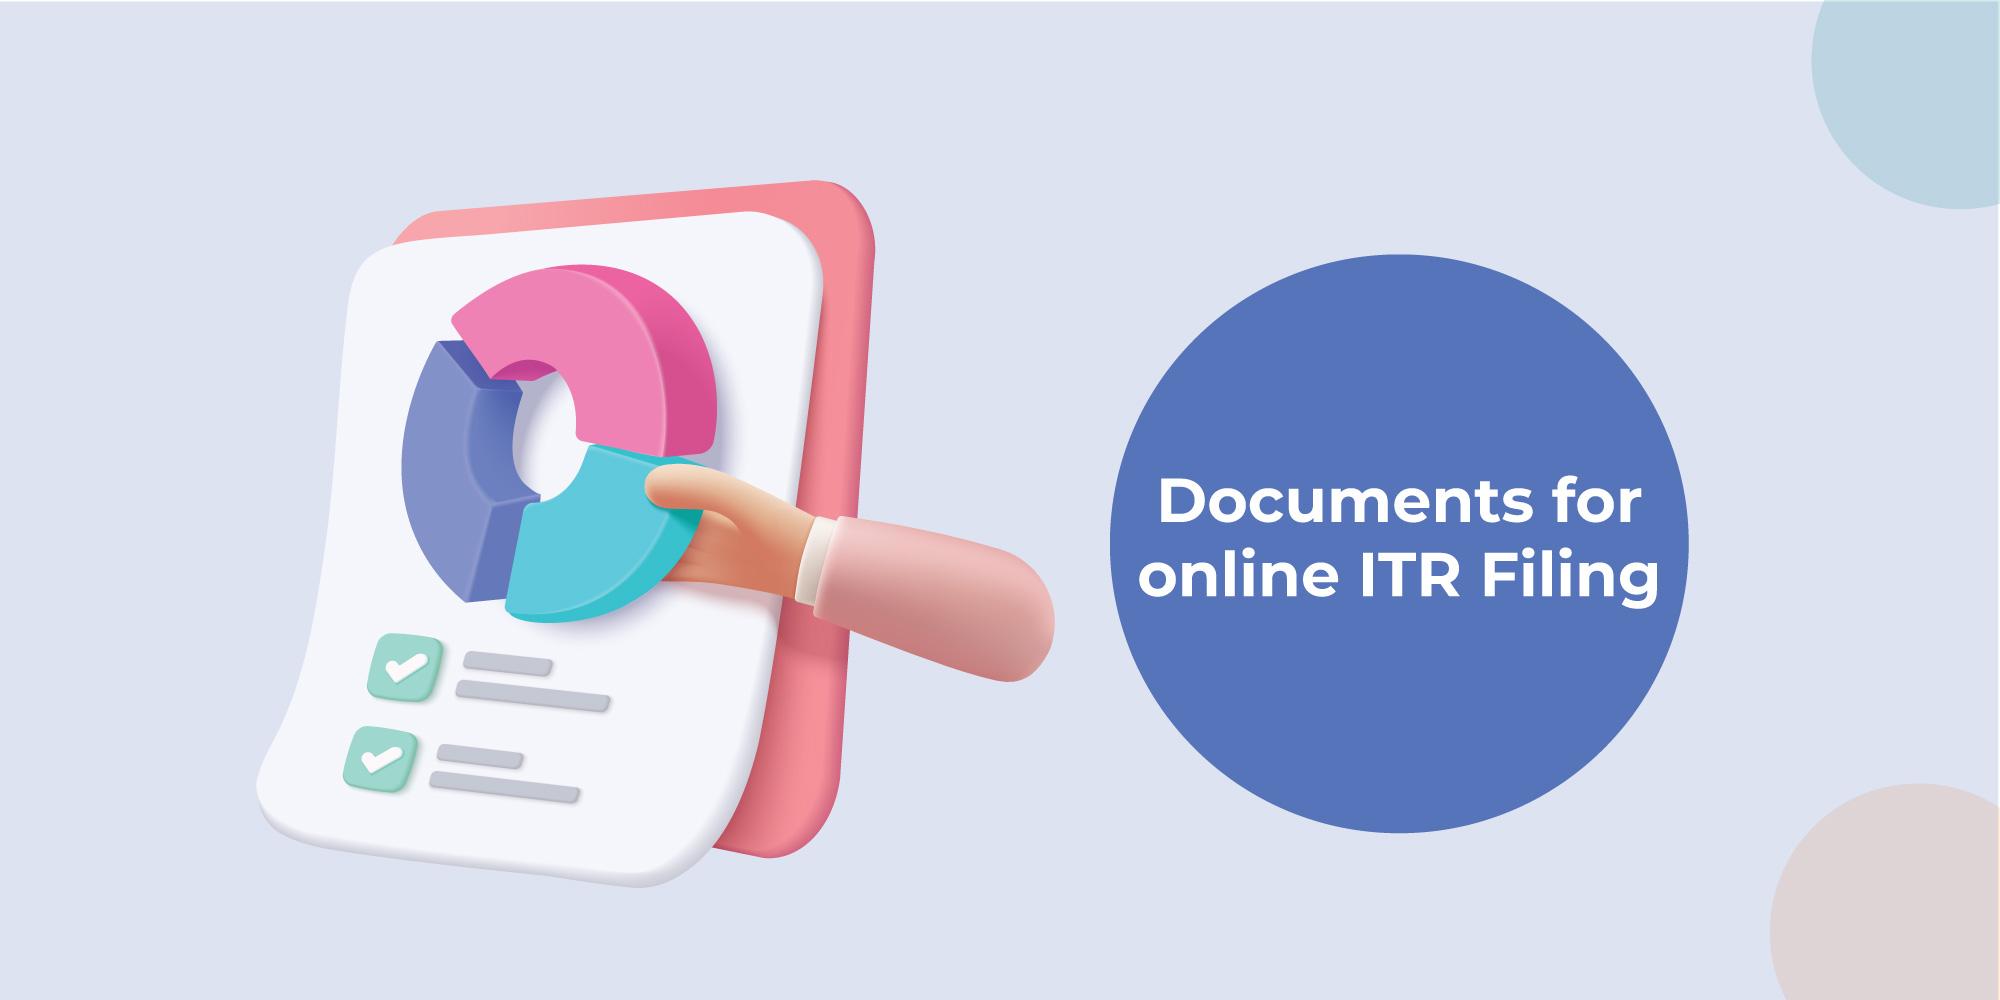 6 Important Documents Required for ITR Filing